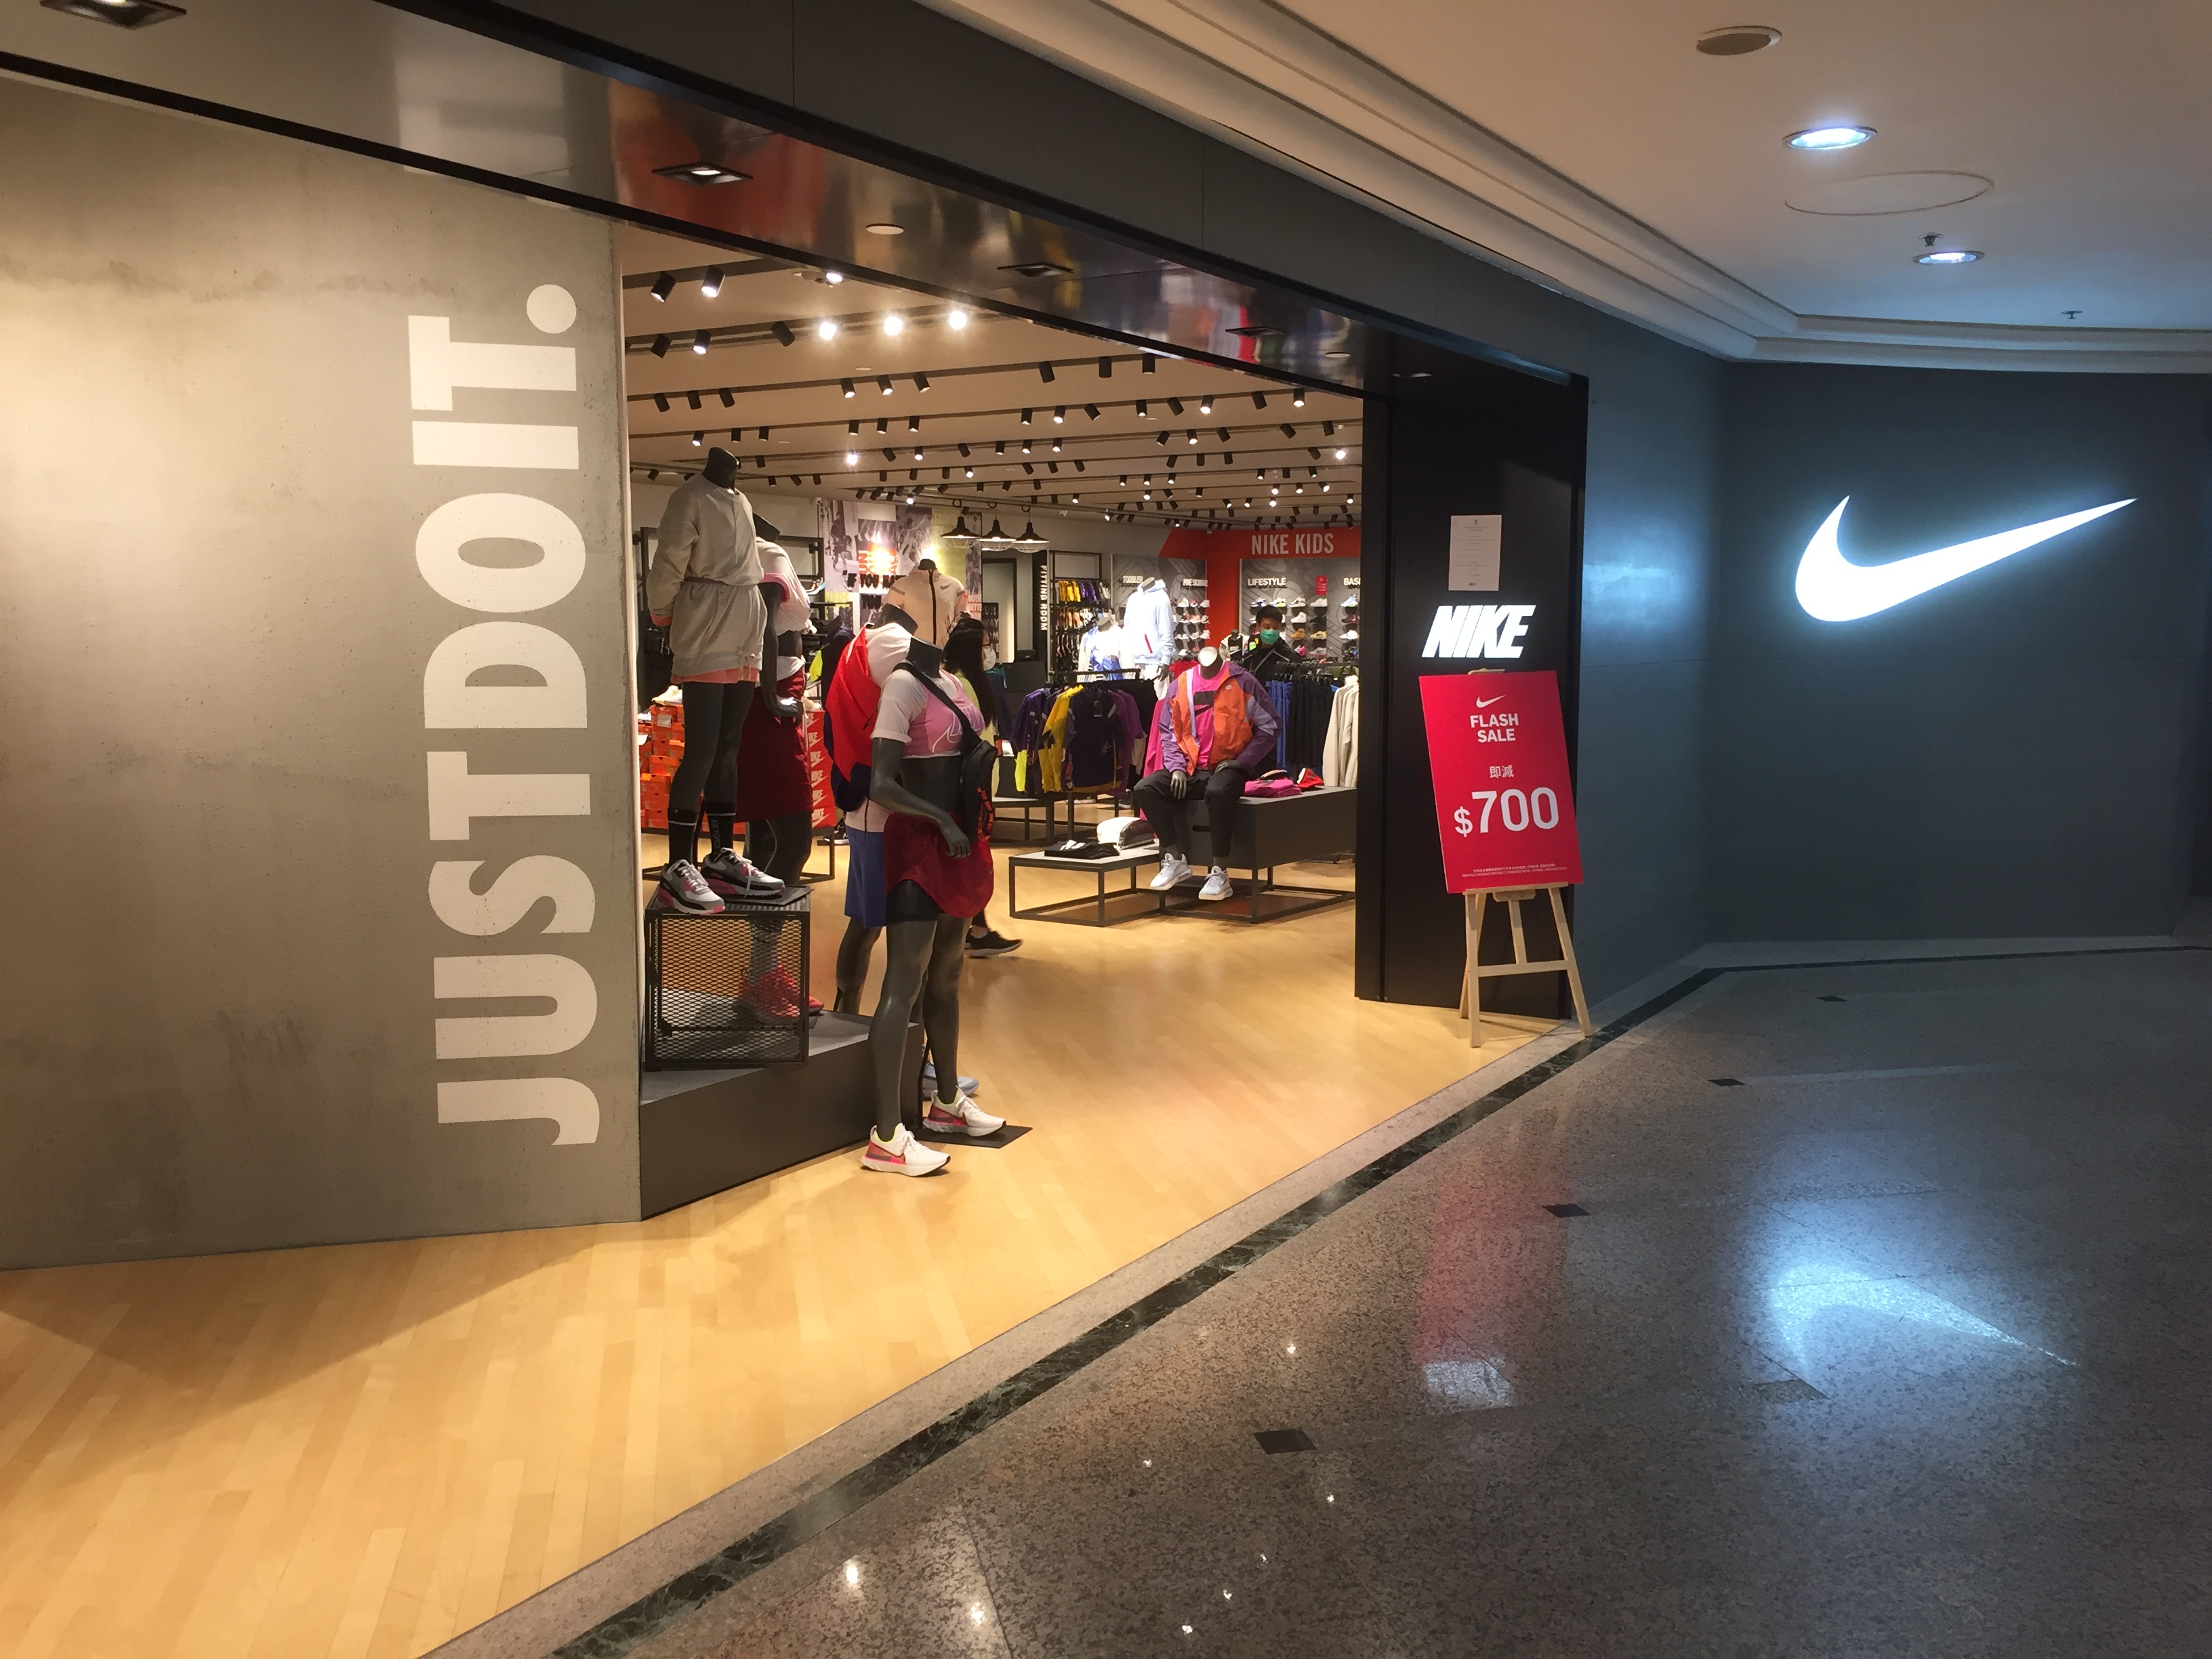 marco pistón Propio Shopping itineraries in Nike in 2023-06-30T17:00:00-07:00 (updated in  2023-06-30T17:00:00-07:00) - Trip.com